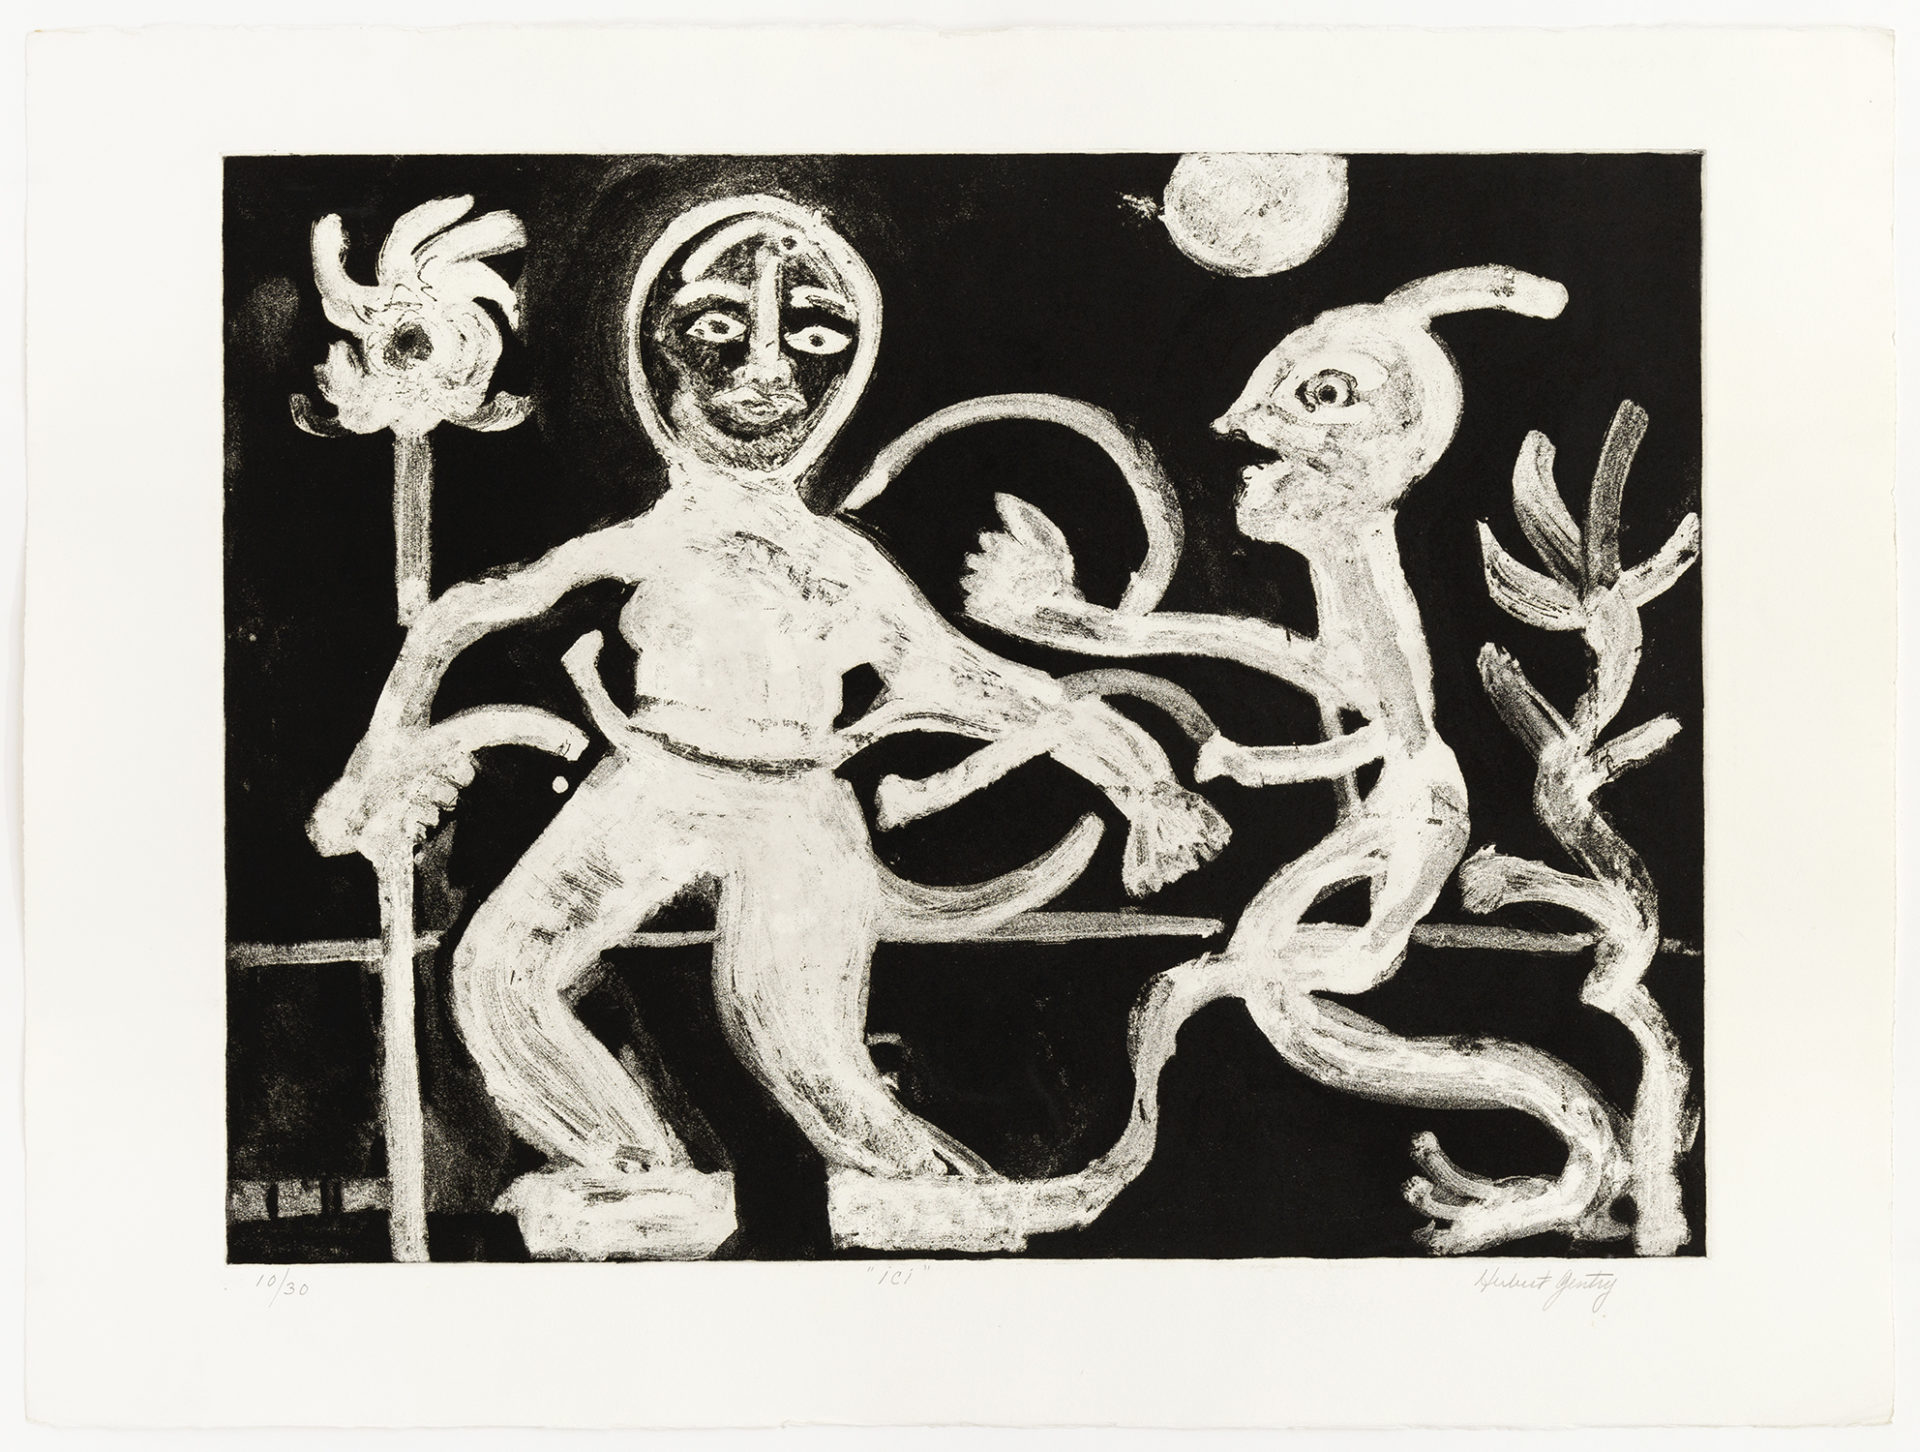 ICI, 1984, Etching, 22 1/4 x 30 inches (56.5 x 76.2 cm), Edition of 30